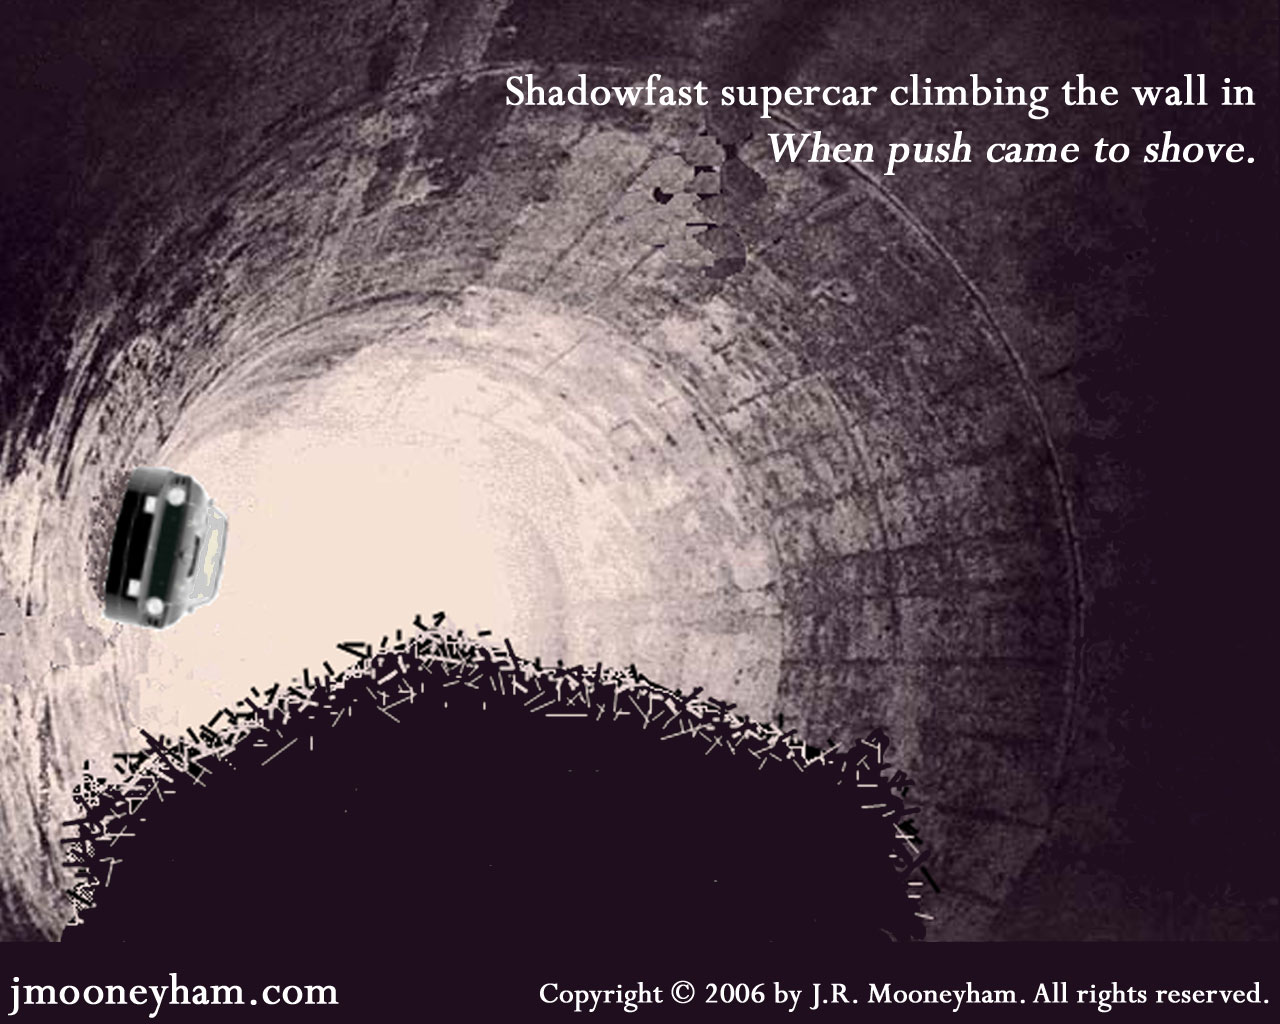 Free 1280x1024 jpeg desktop wallpaper (Poster of the Shadowfast supercar climbing the wall in the story When push came to shove)